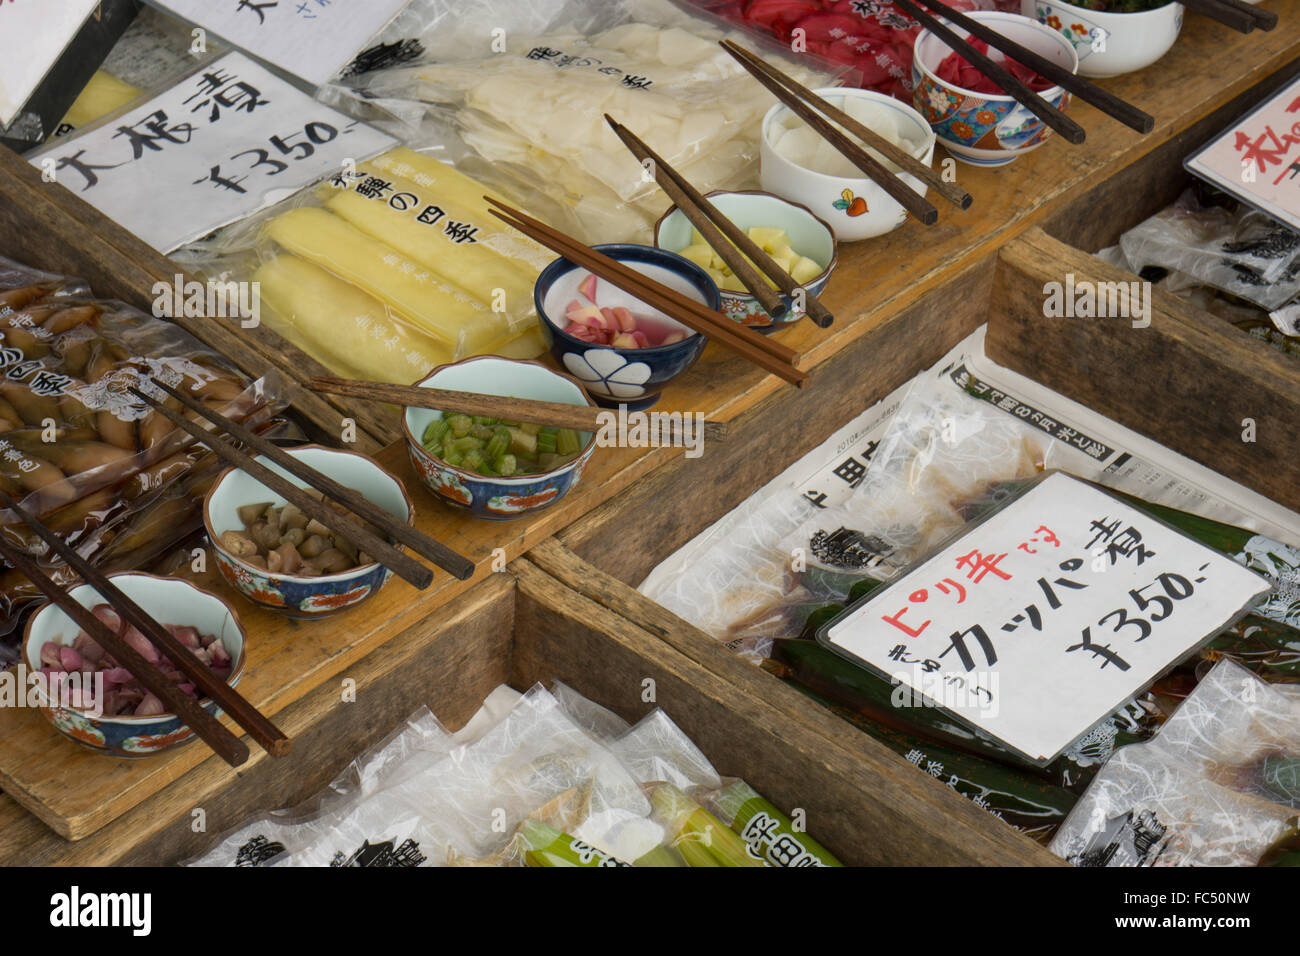 pickled vegetables at a farmer's market in Takayama Japan Stock Photo